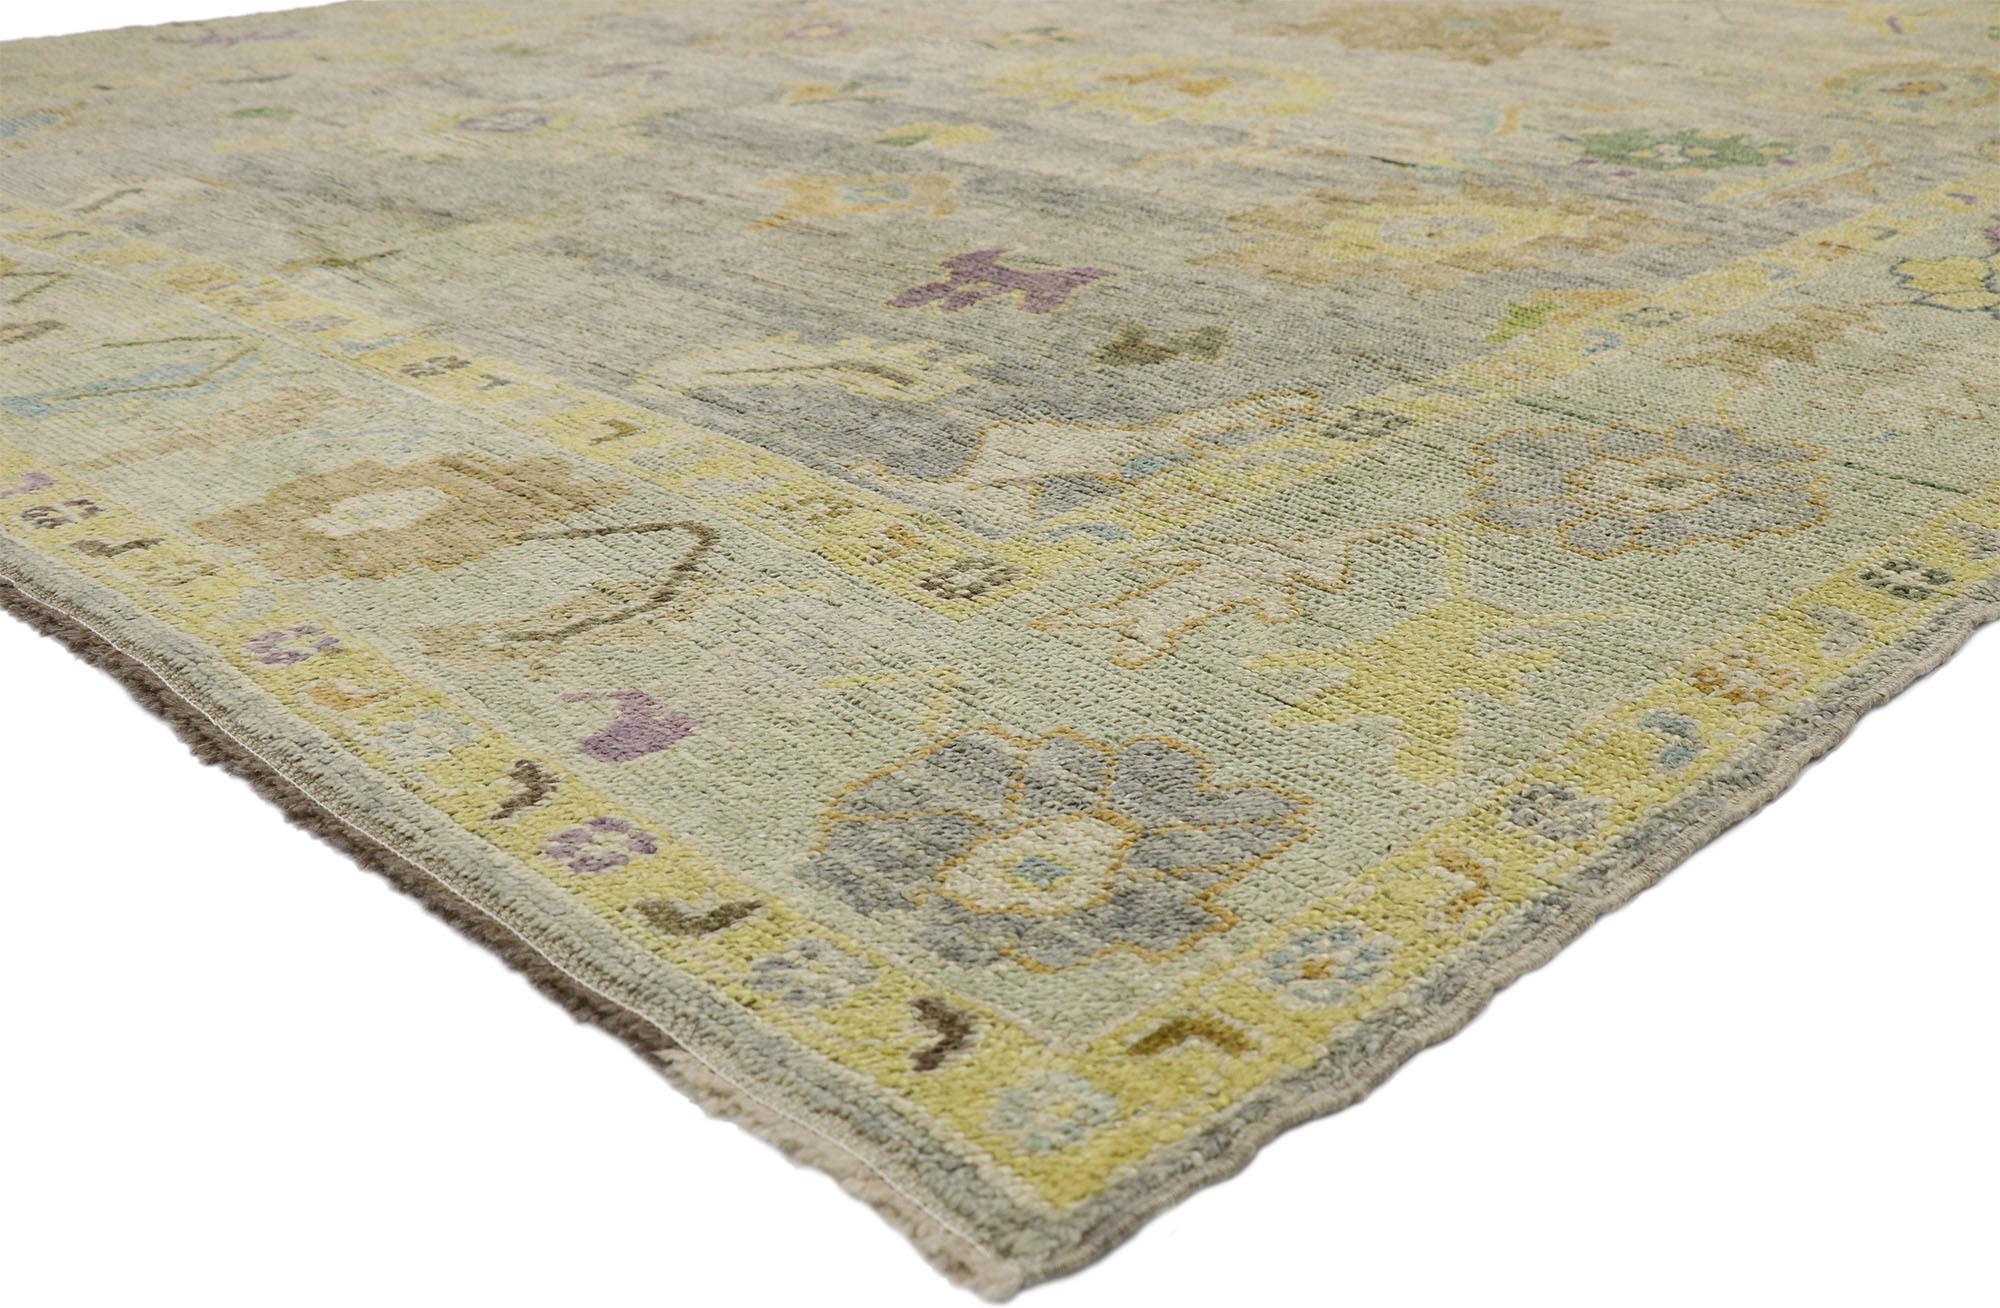 52540, New Contemporary Turkish Oushak Rug with Pastel Colors and French Transitional Style 08'07 x 10'03. Highly stylish yet tastefully casual, this new colorful Turkish Oushak rug features an all-over geometric pattern composed of Harshang motifs,